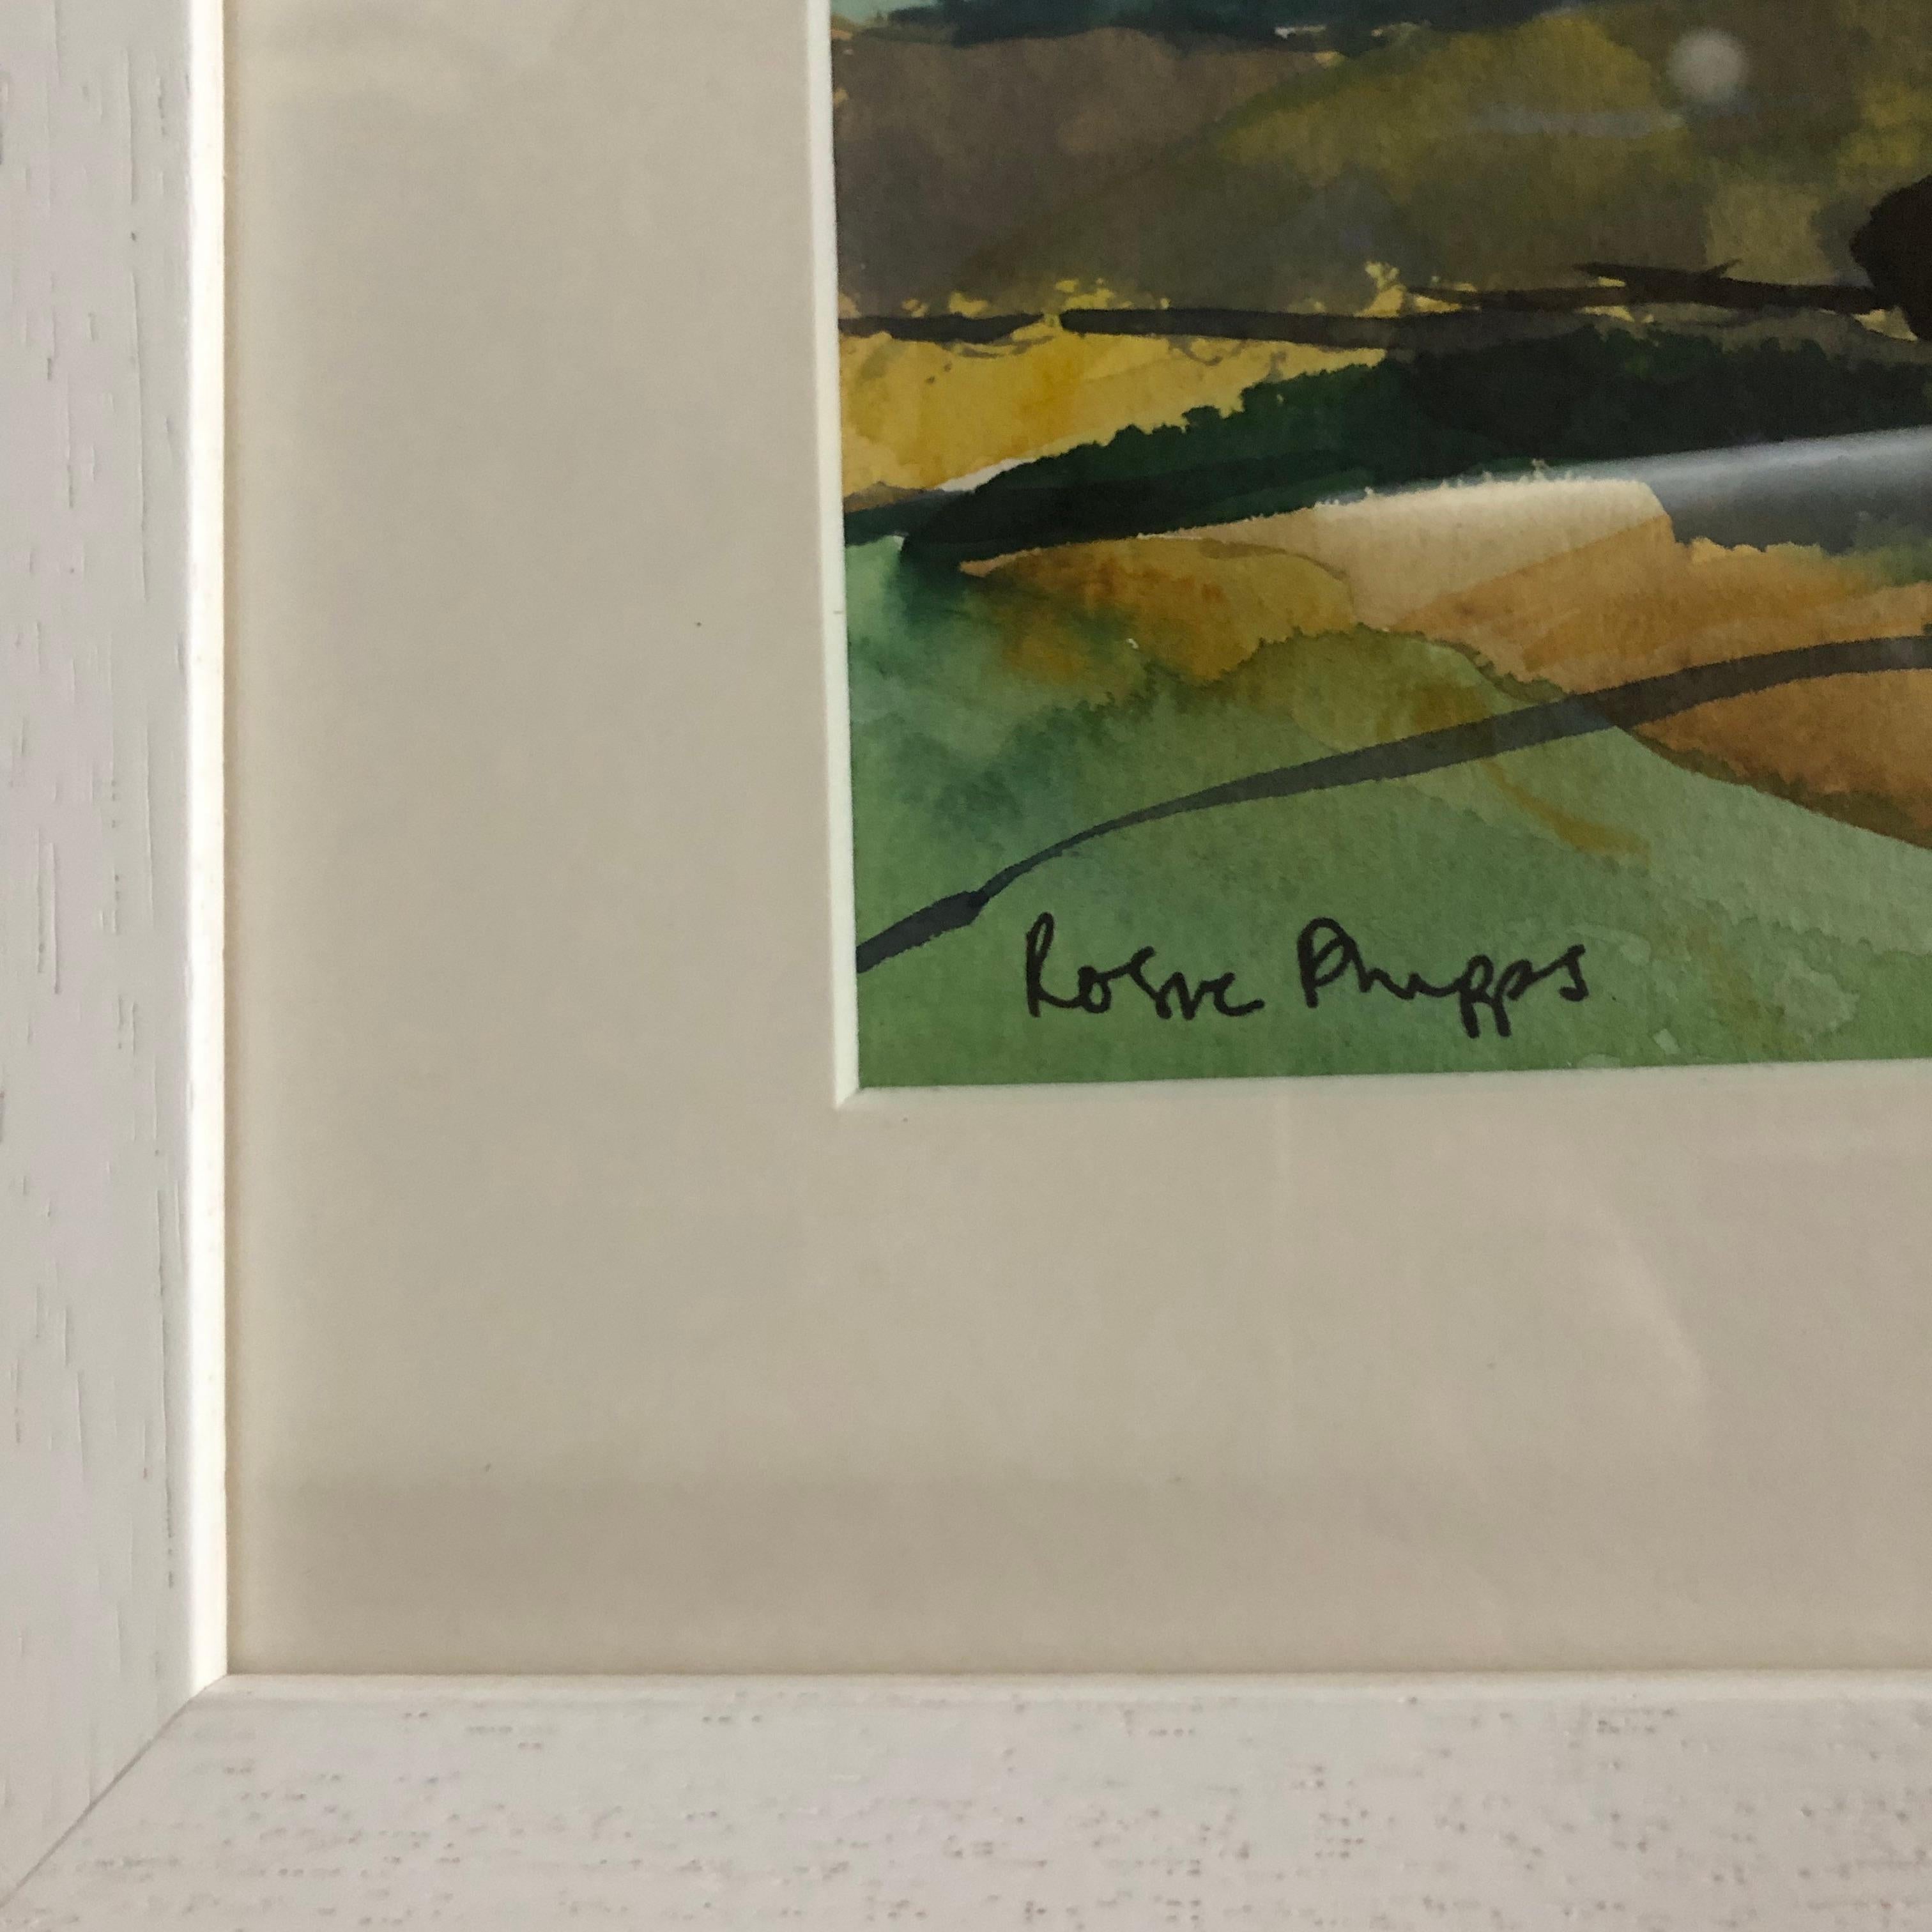 Rosie Phipps
Bright Day
Original Landscape Painting
Water Colour Paint, Gouache and Pastel on Paper
Image Size: H 10cm x W 25cm
Mounted Size: H 18.5cm x W 34.5cm
Framed Size: H 23cm x W 40cm x D 3.5cm
Sold Framed in a White Wood Grain Frame
Please